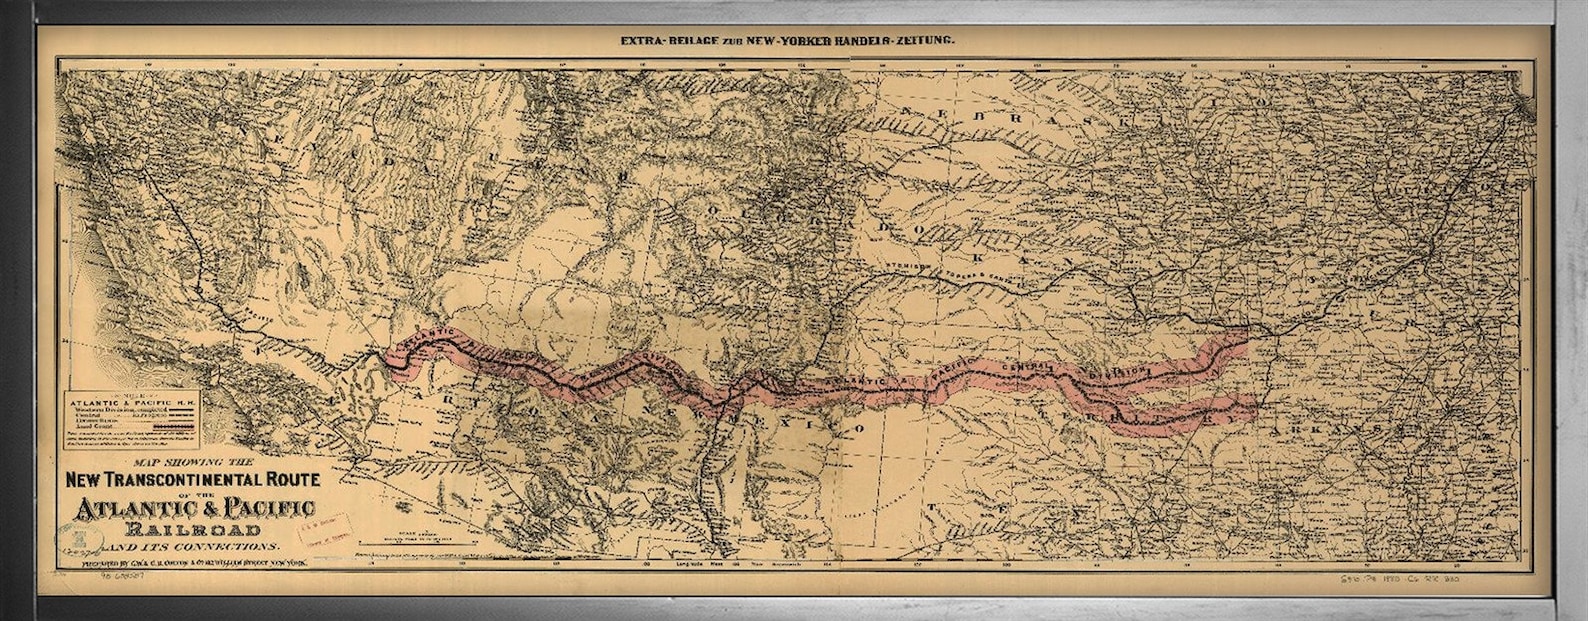 1883 show journey map